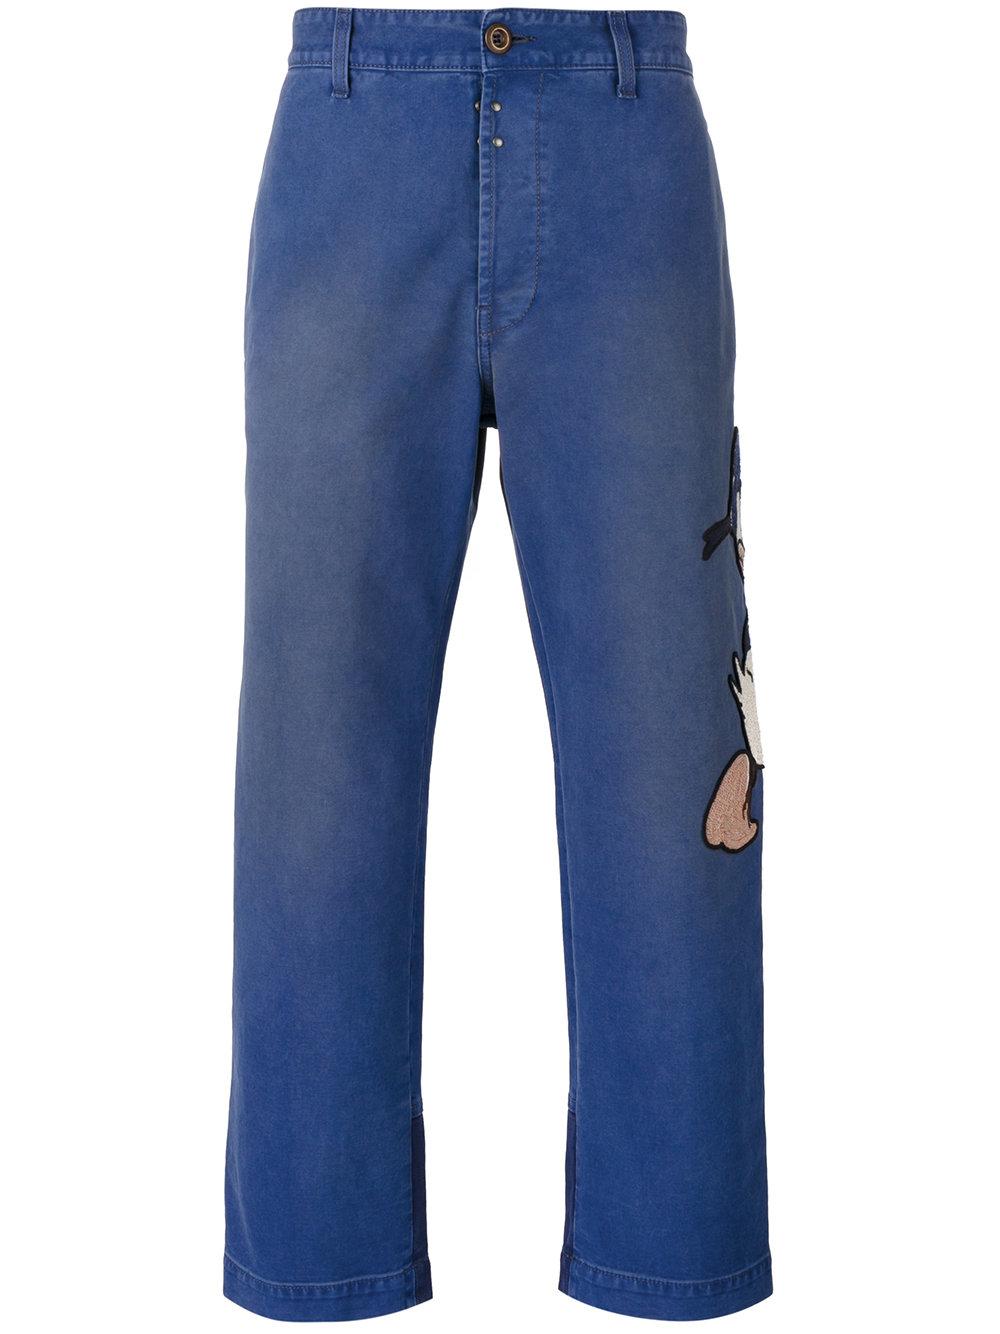 Lyst - Gucci Donald Duck Embroidered Jeans in Blue for Men